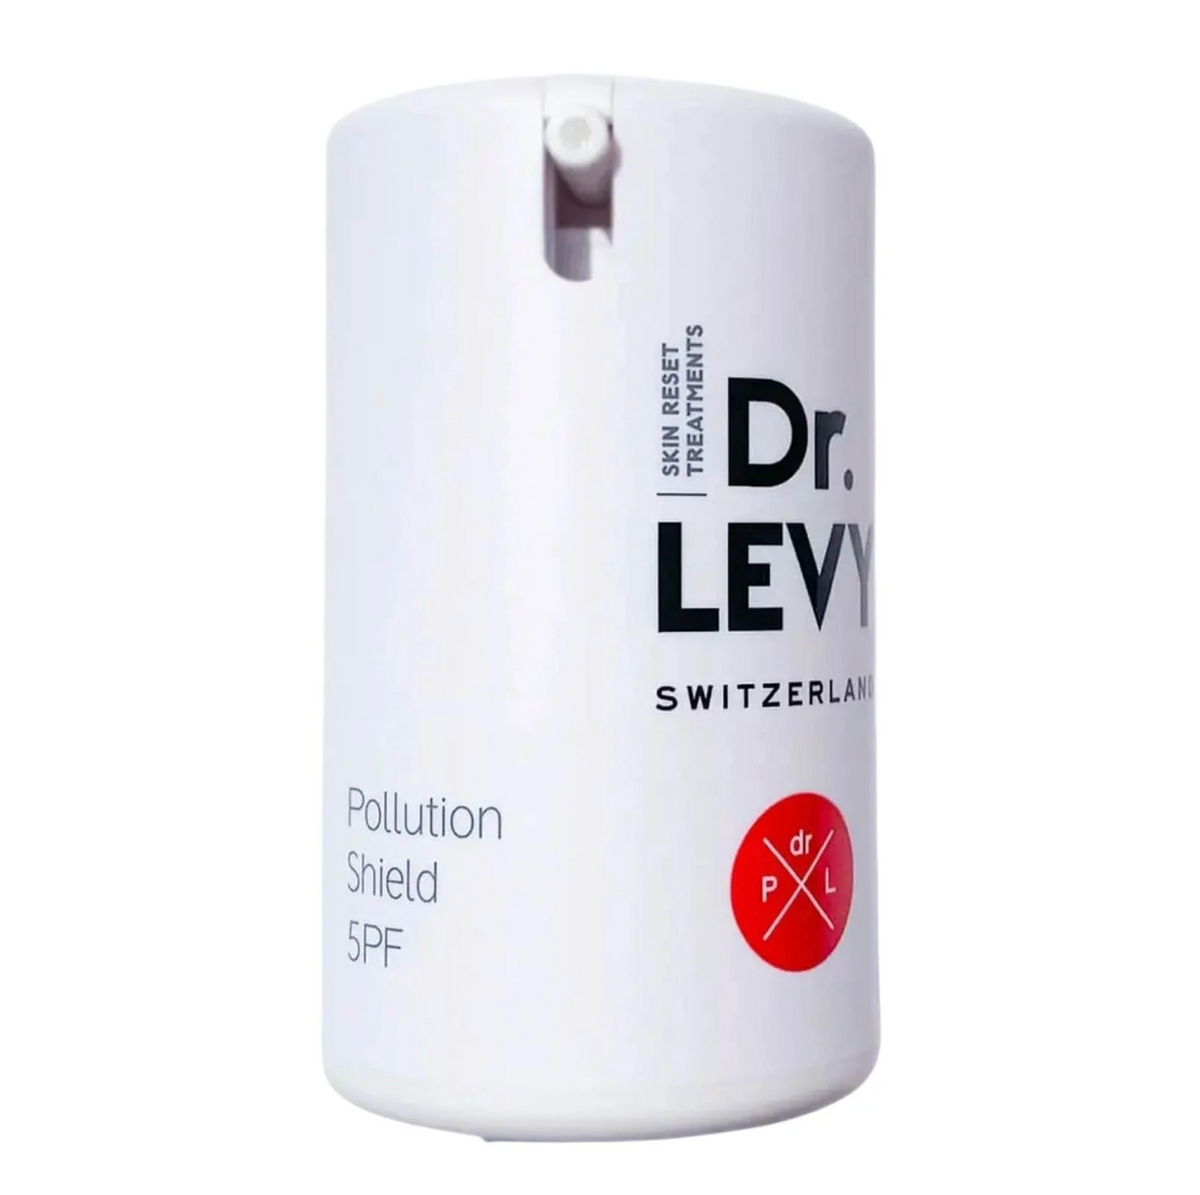 Dr. Levy Pollution Shield 5PF 30ml